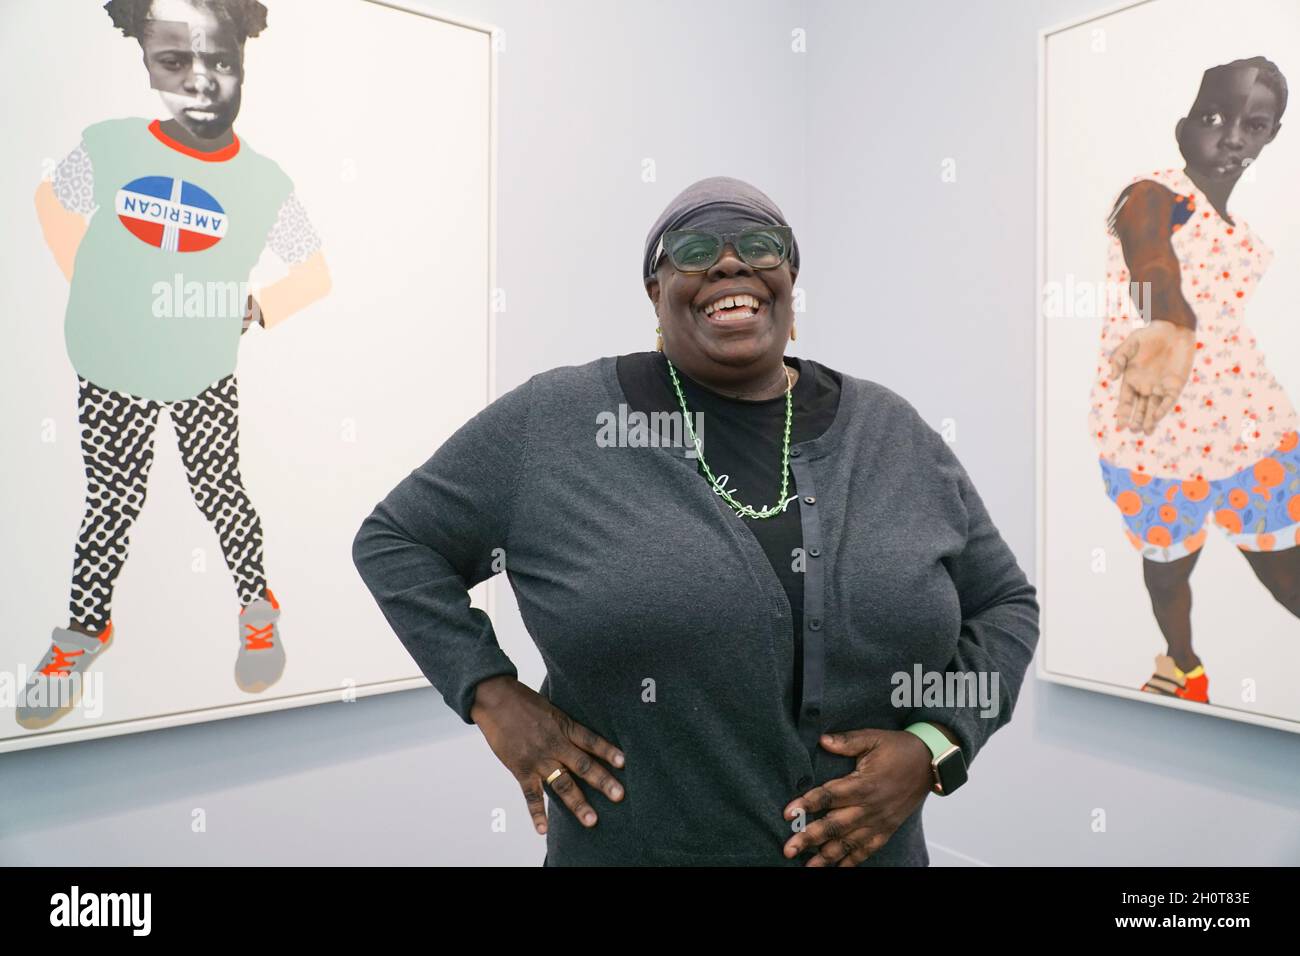 London, UK, 14 October 2021: Frieze art fair opens in London with contemporary art from around the world. American artist Deborah Roberts has a presentation of her distinctive style of paintings using collage and mixed media. Anna Watson/Alamy Live News Stock Photo